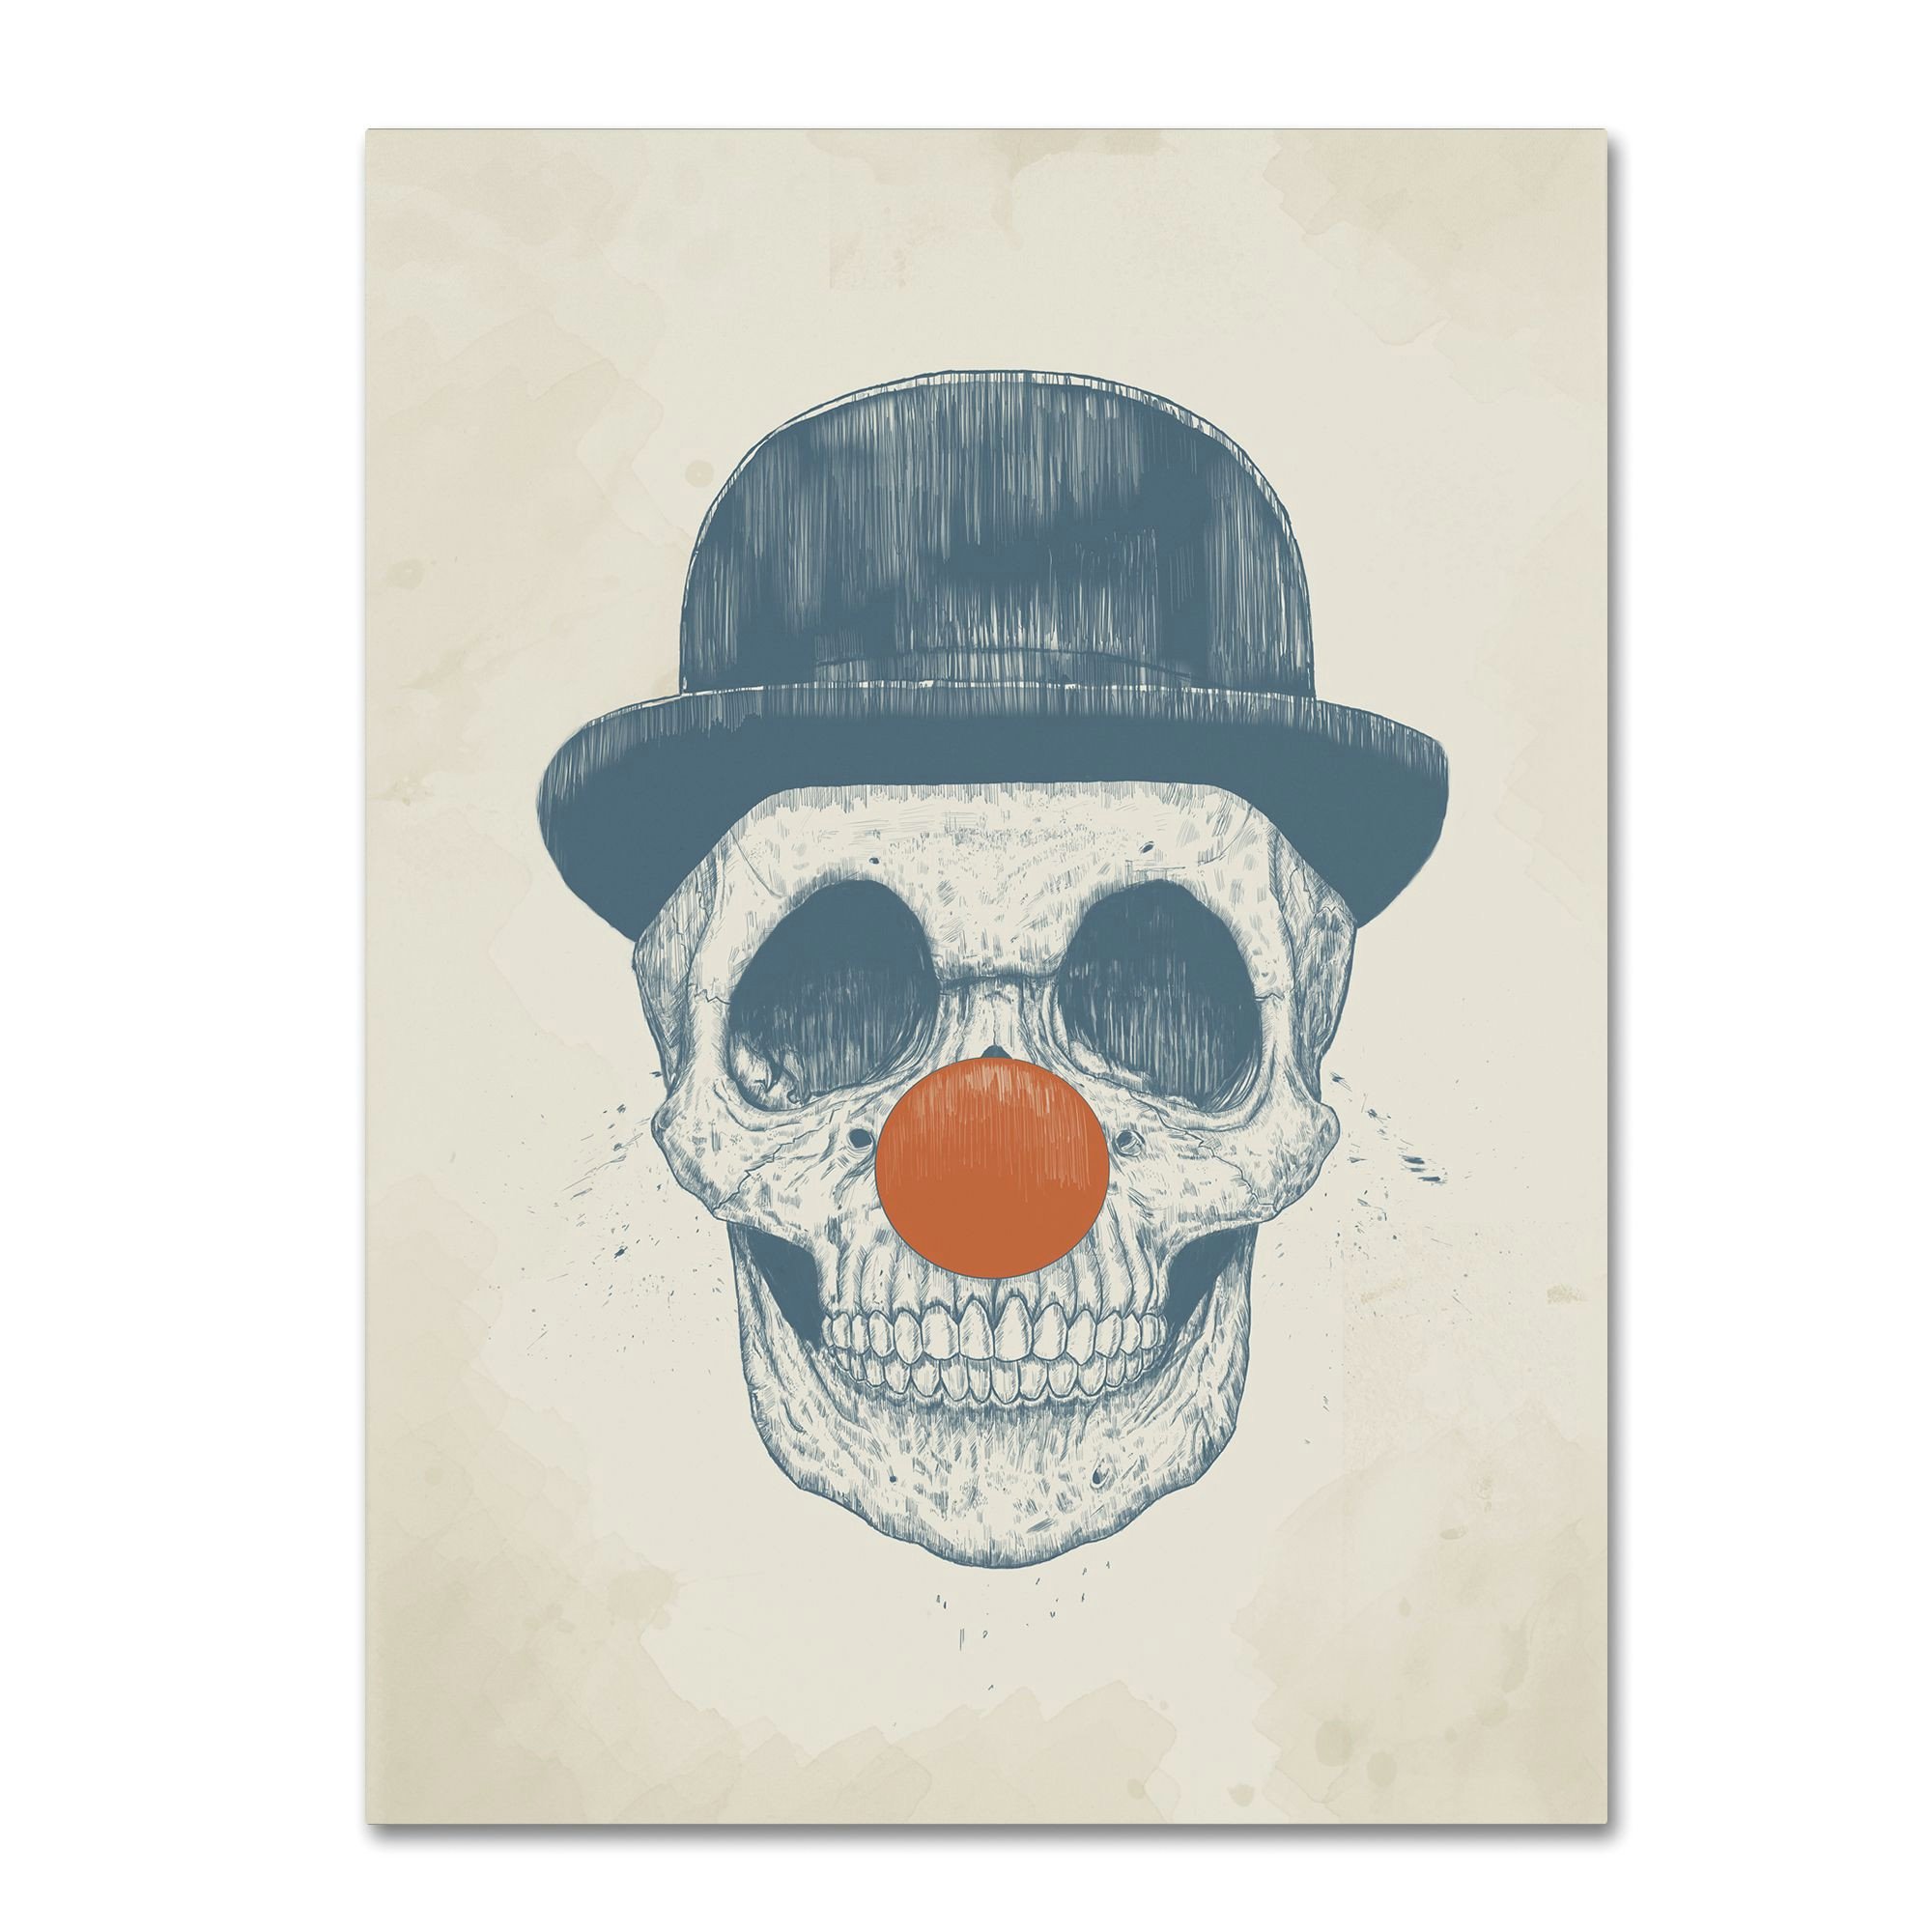 Drawing A Skull In Illustrator This Ready to Hang Gallery Wrapped Art Piece Features A Drawing Of